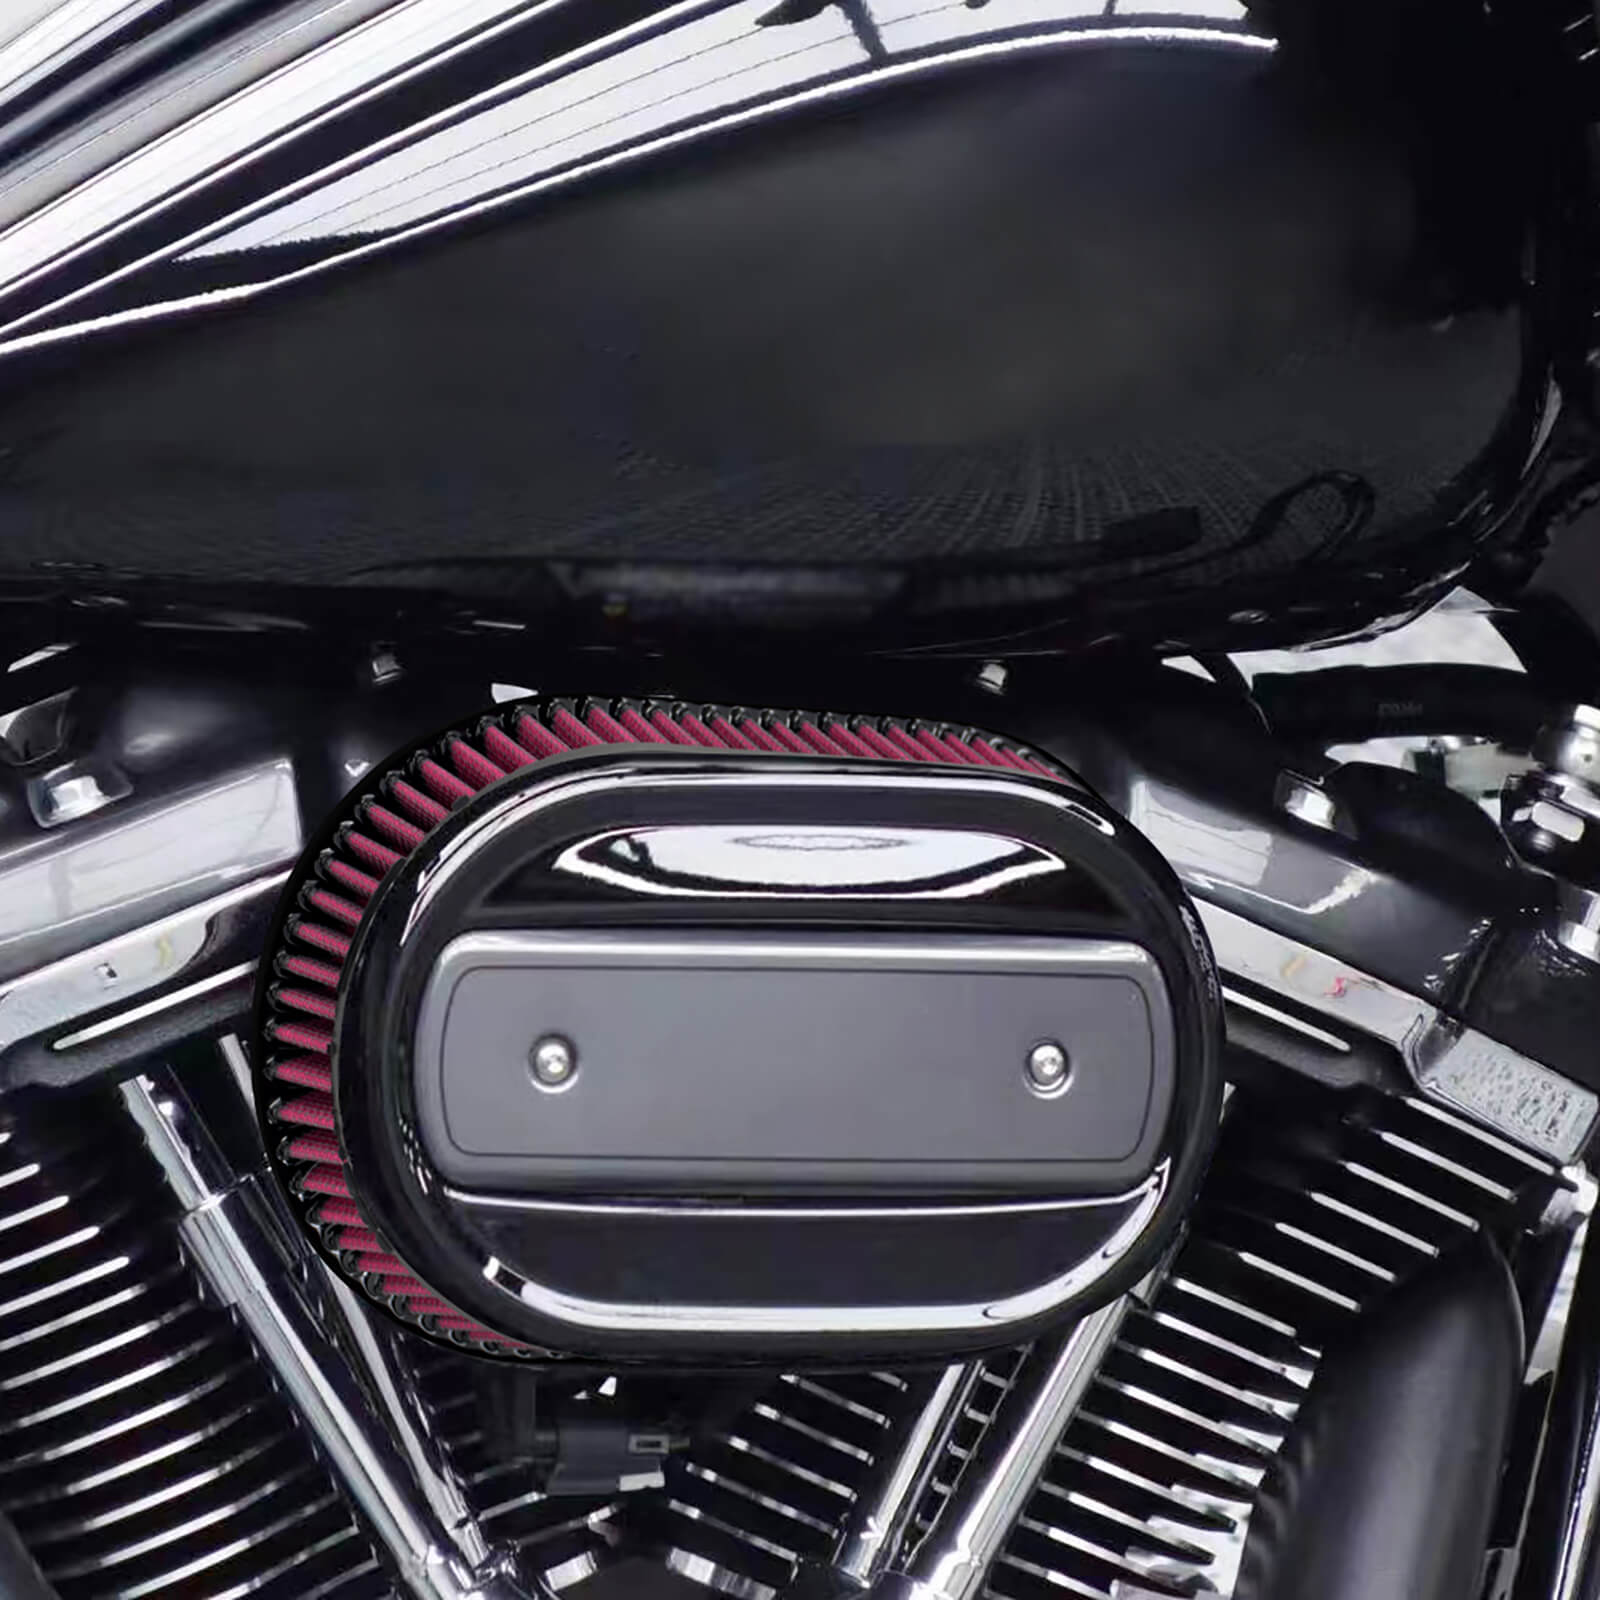 AF009401-mactions-air-cleaner-replacement-for-harley